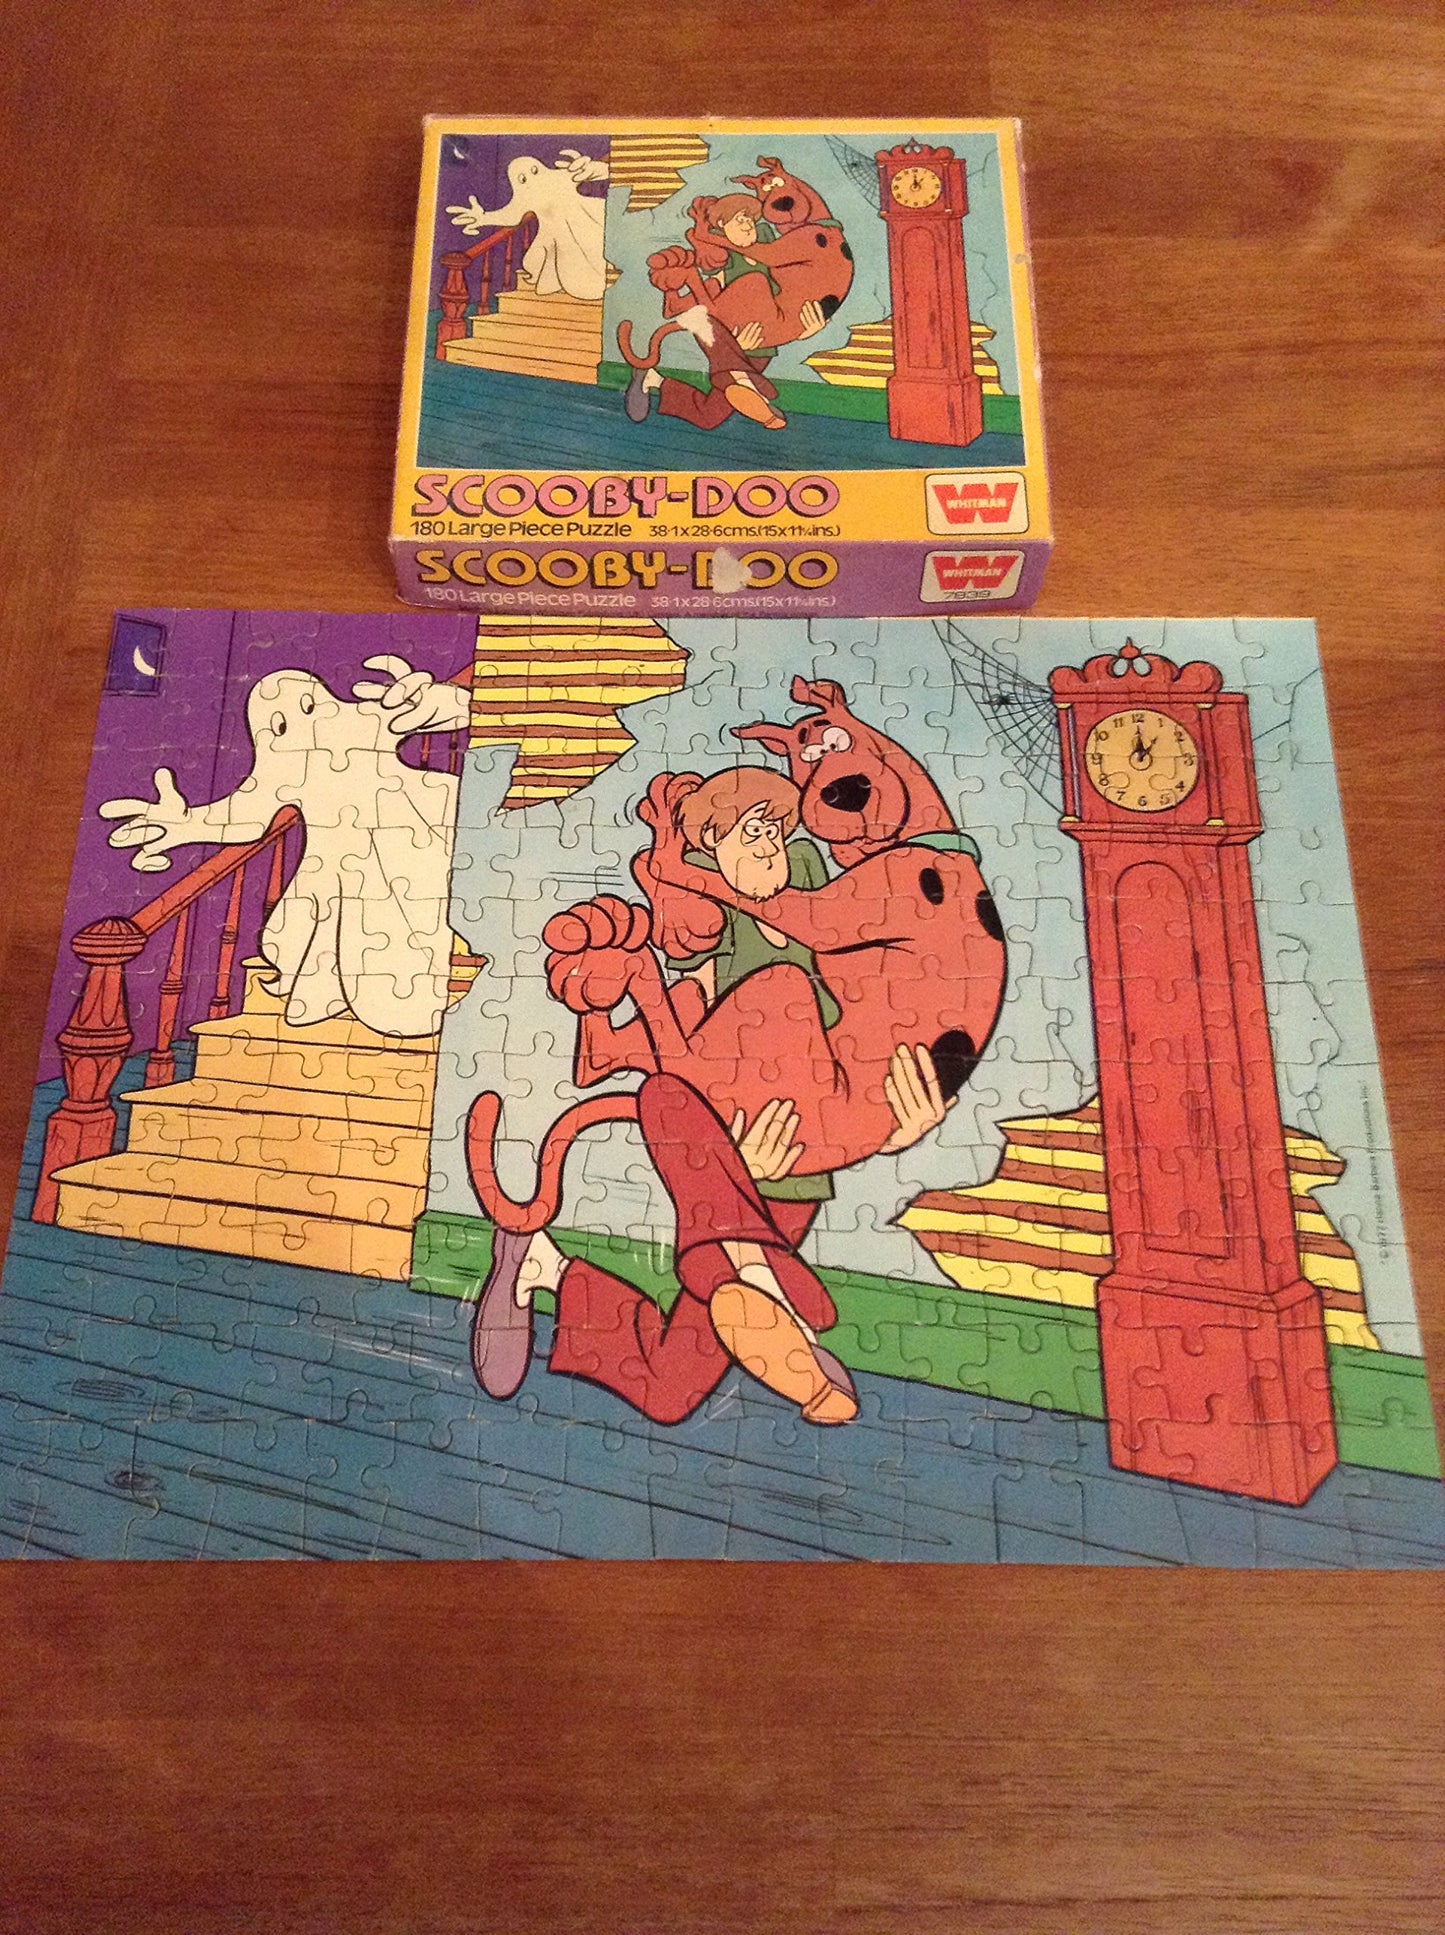 Scooby Doo Jigsaw Puzzle Vintage 1977 Whitman 180 Large Piece Jigsaw Puzzle Number 7839